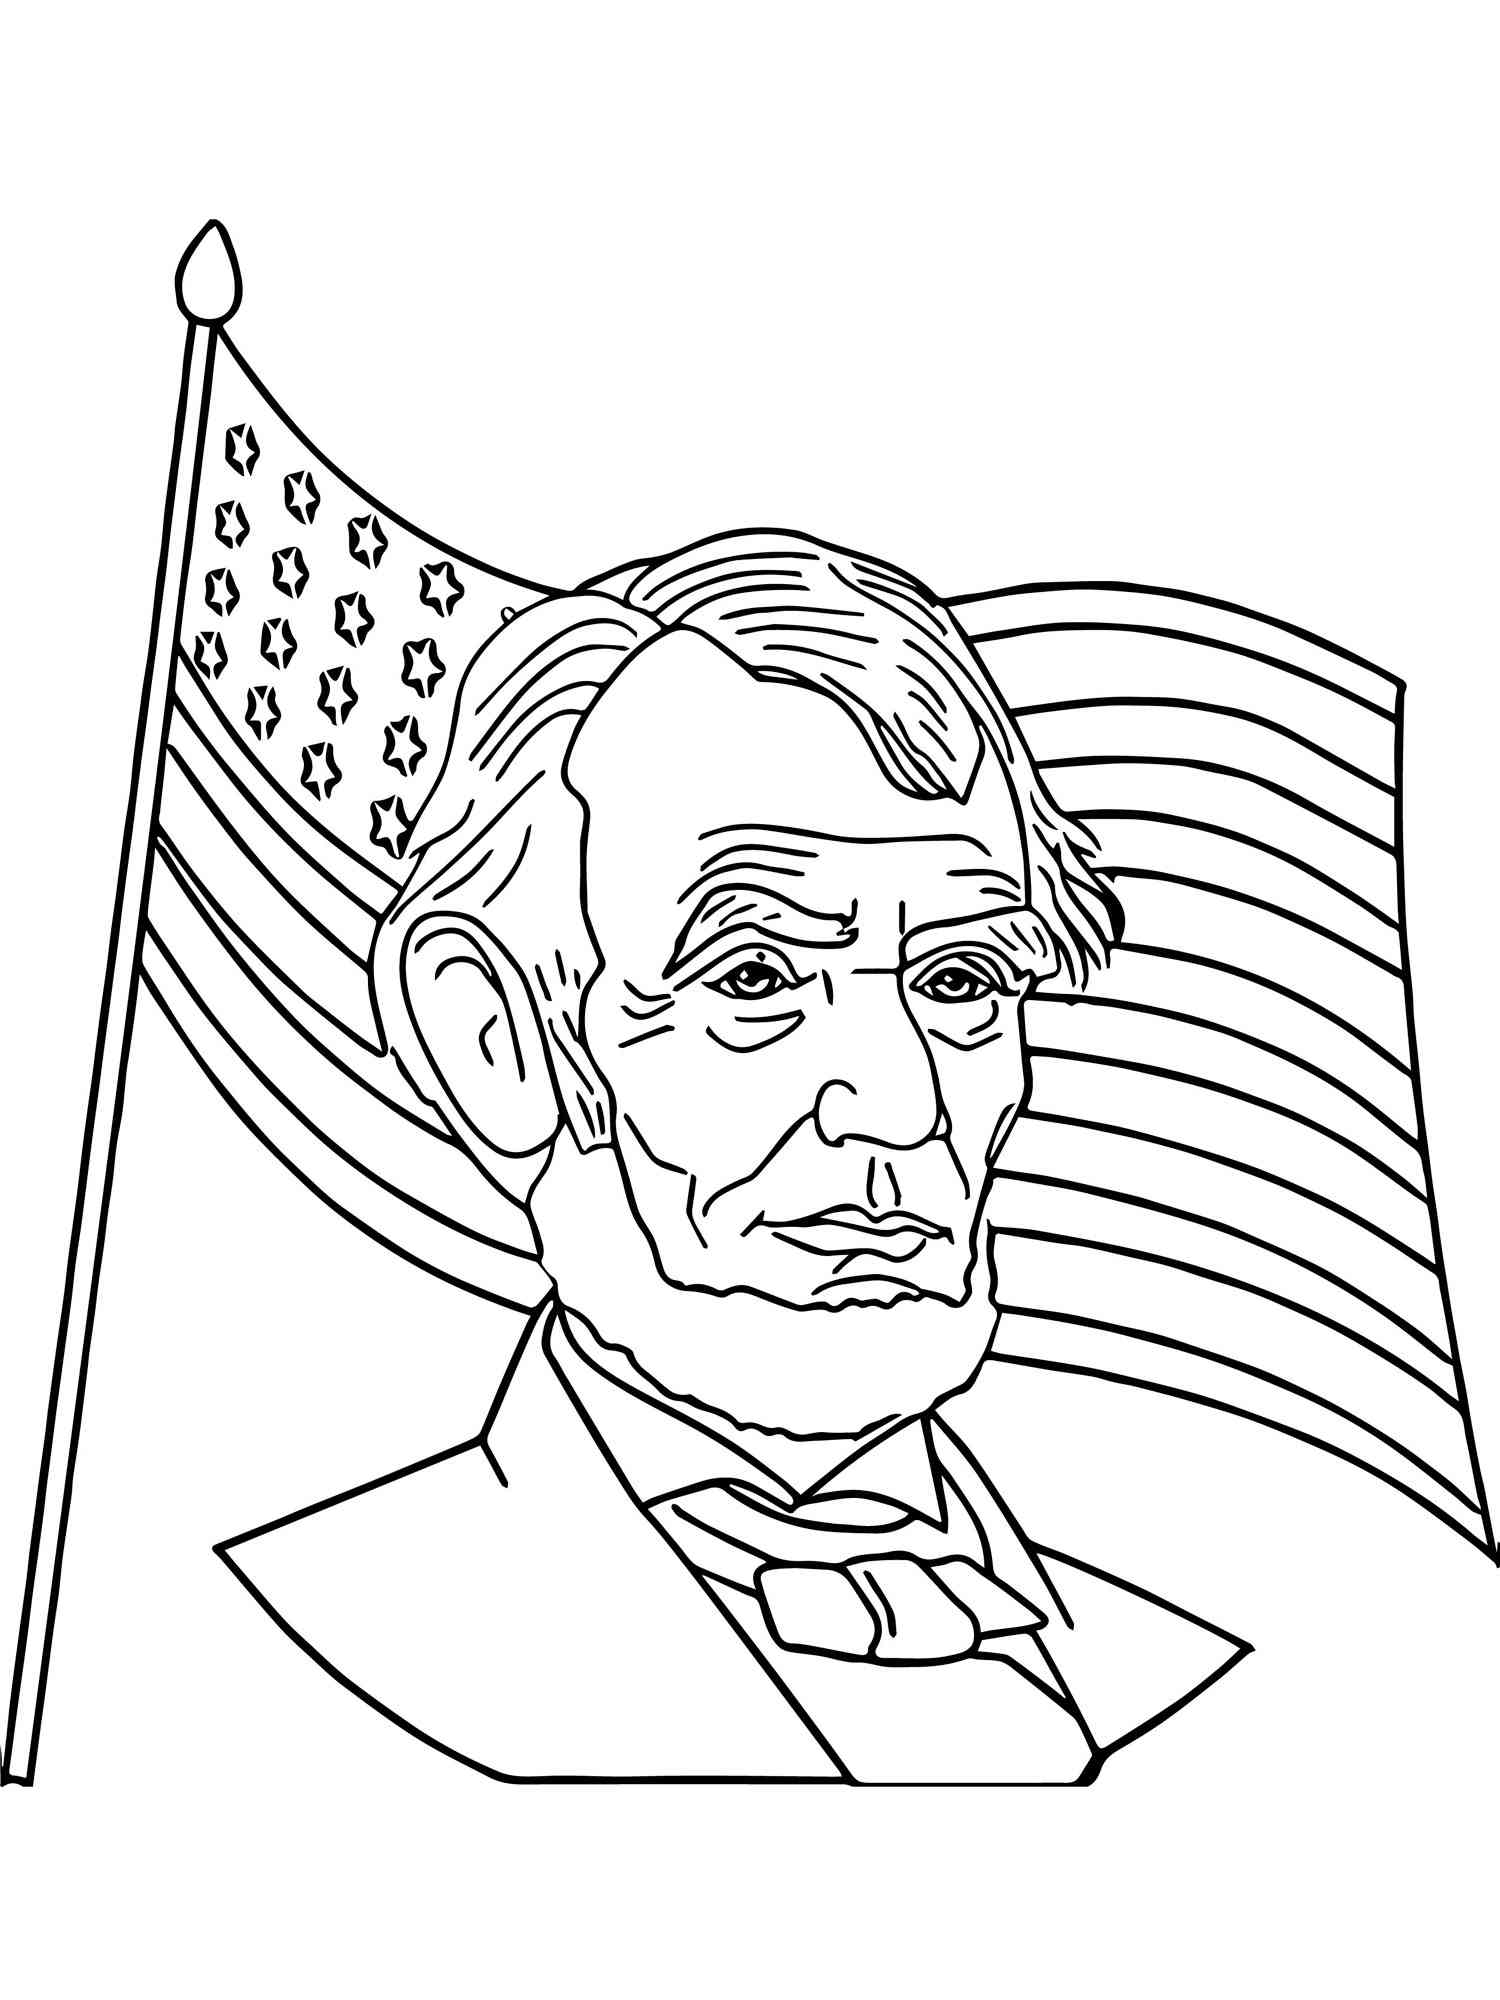 Abraham Lincoln with flag background coloring page